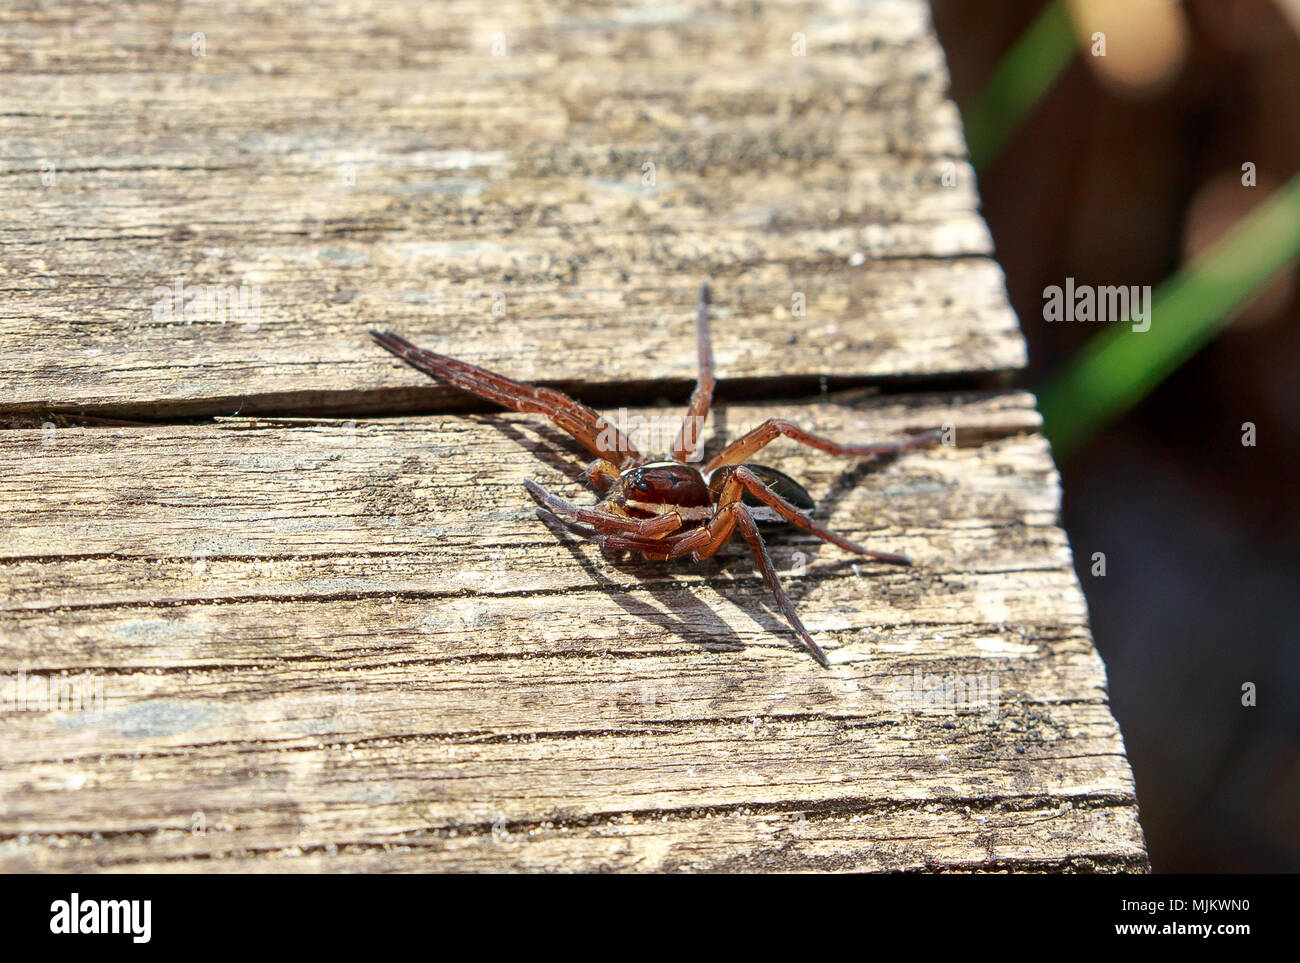 A Raft spider (Dolomedes sp) Stock Photo